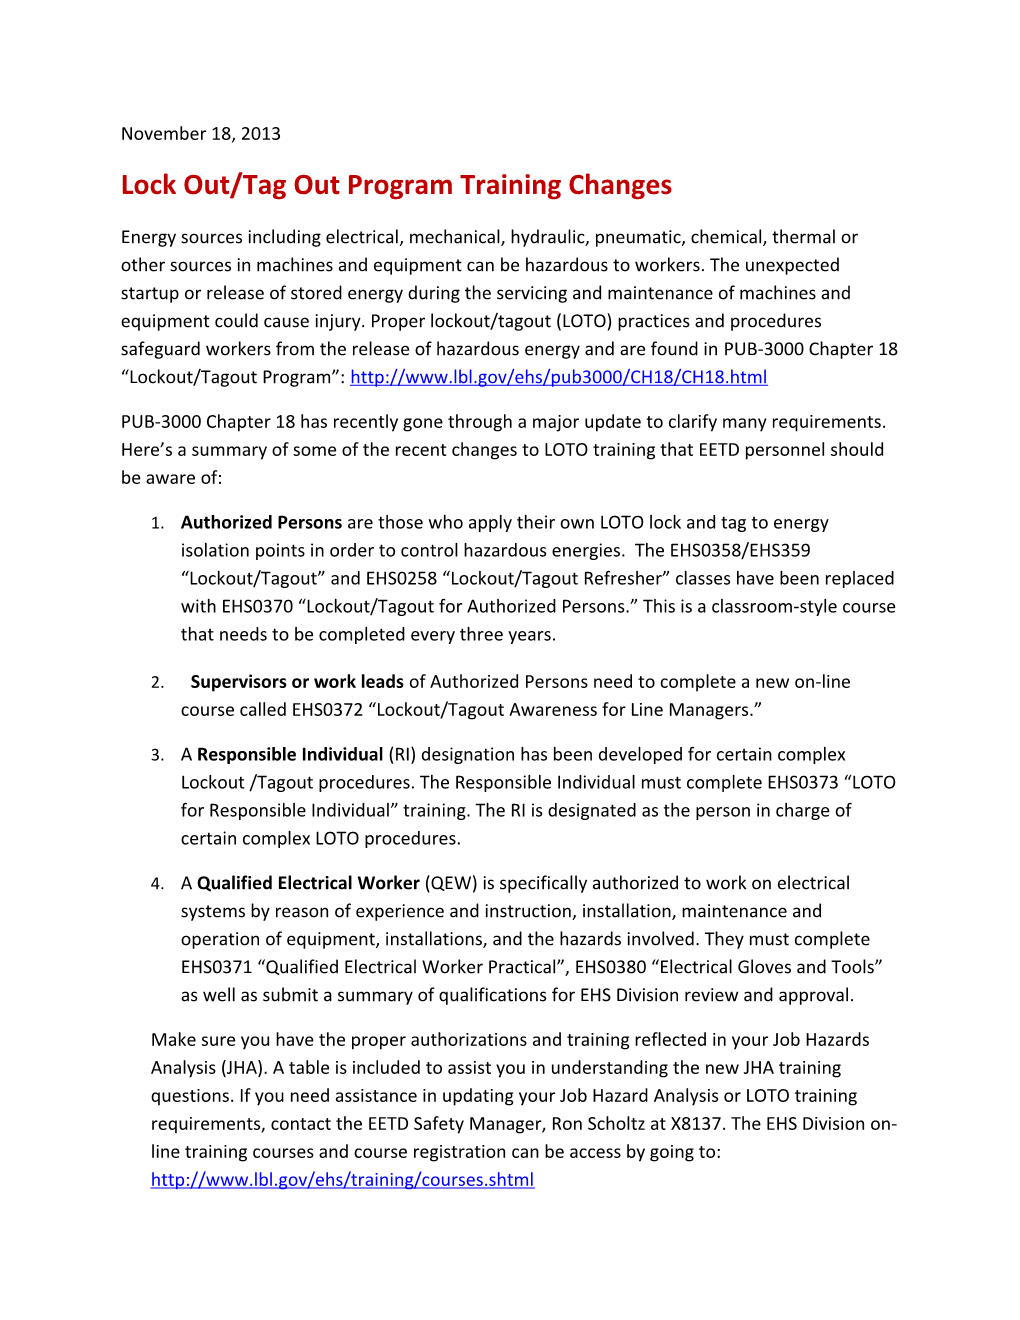 Lock Out/Tag out Program Training Changes